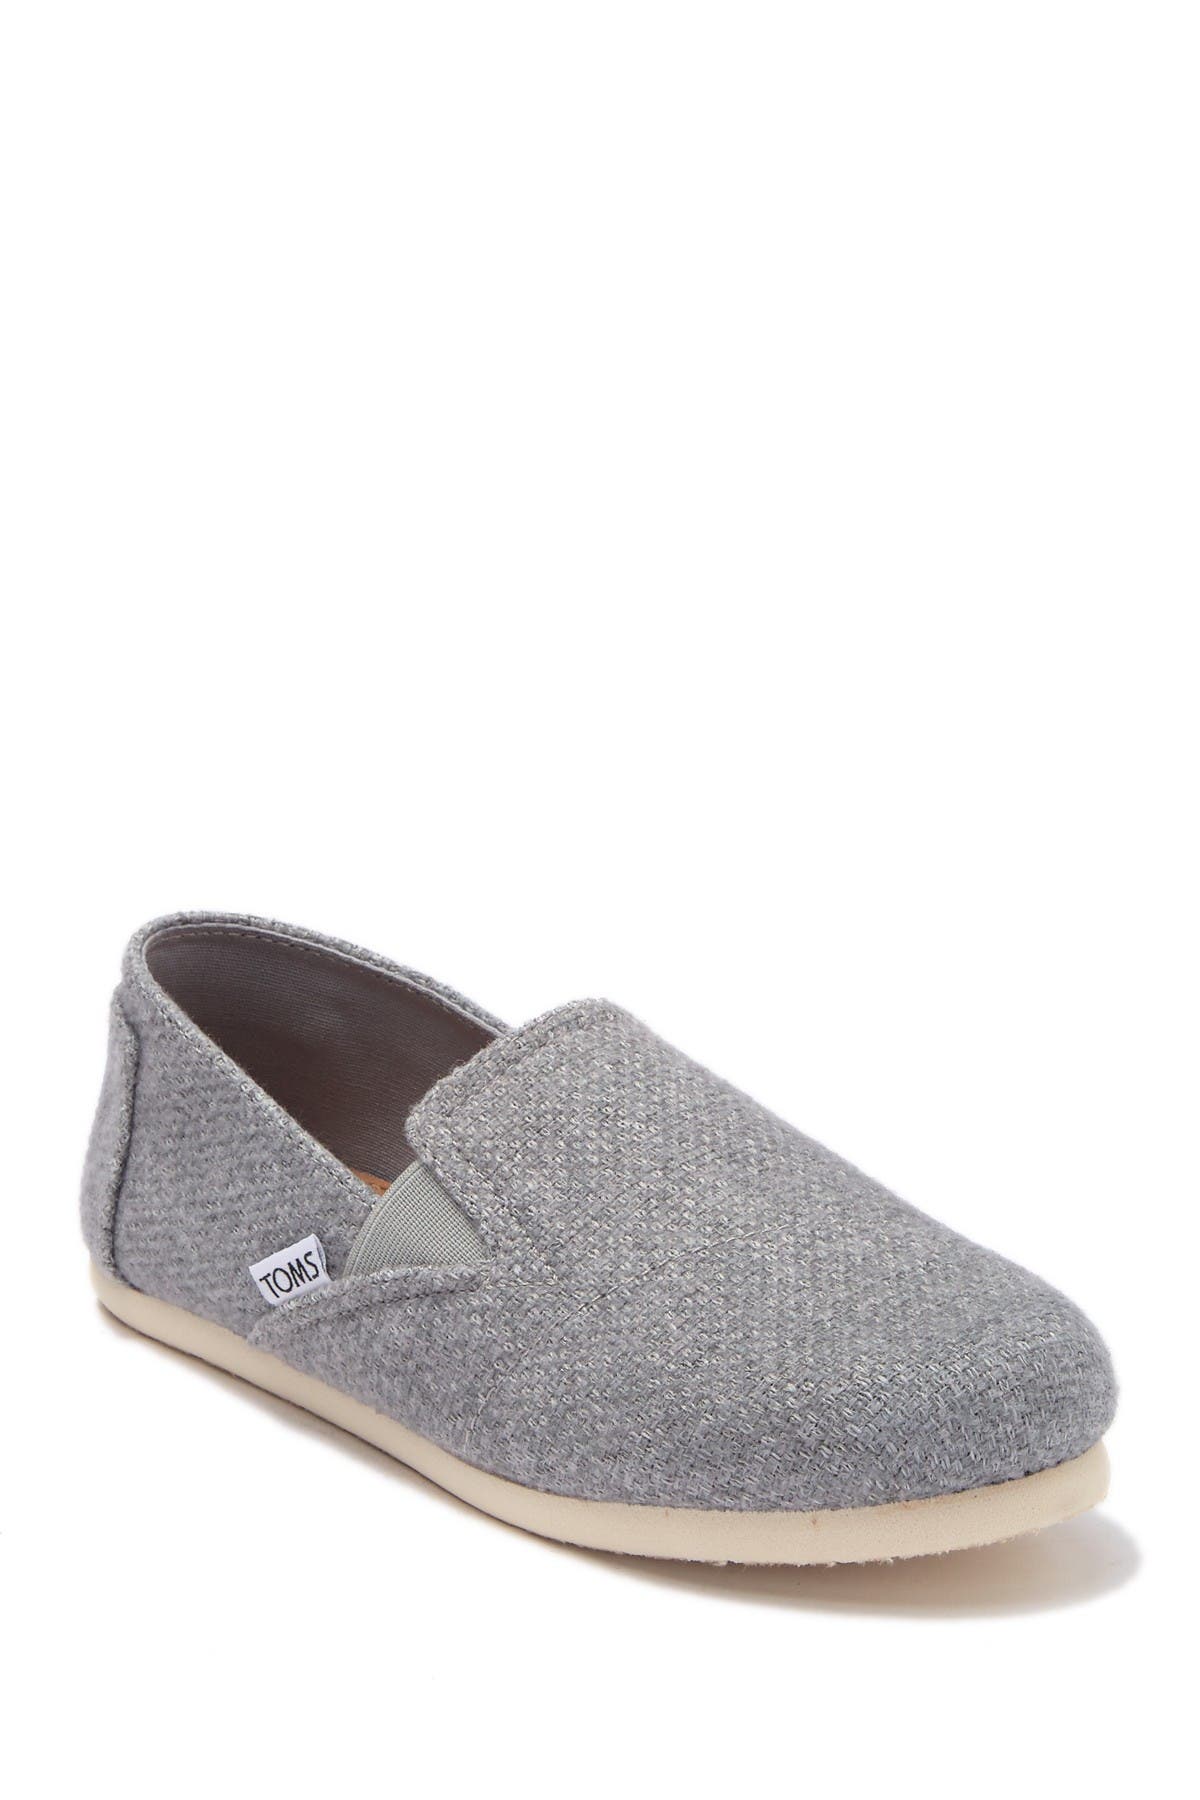 where can i buy toms shoes near me